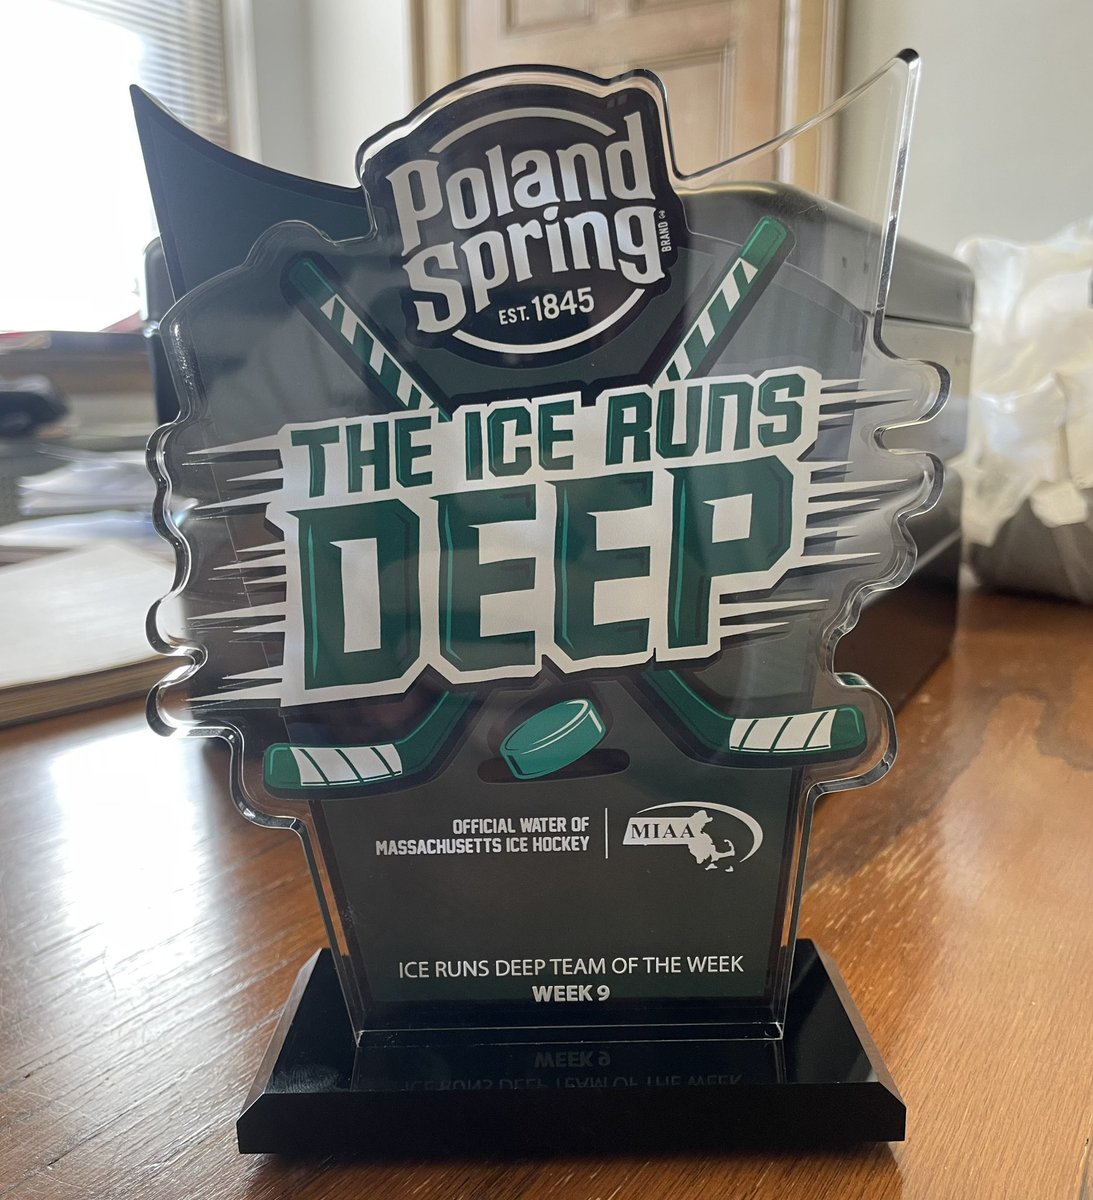 The boys are the Poland Springs boys Hockey team of the week in Mass for week 9!!

Thank you to @polandspringwtr and @miaa033 for the opportunity. #icerunsdeep @MassNZ @MassHSHockey @tgsports